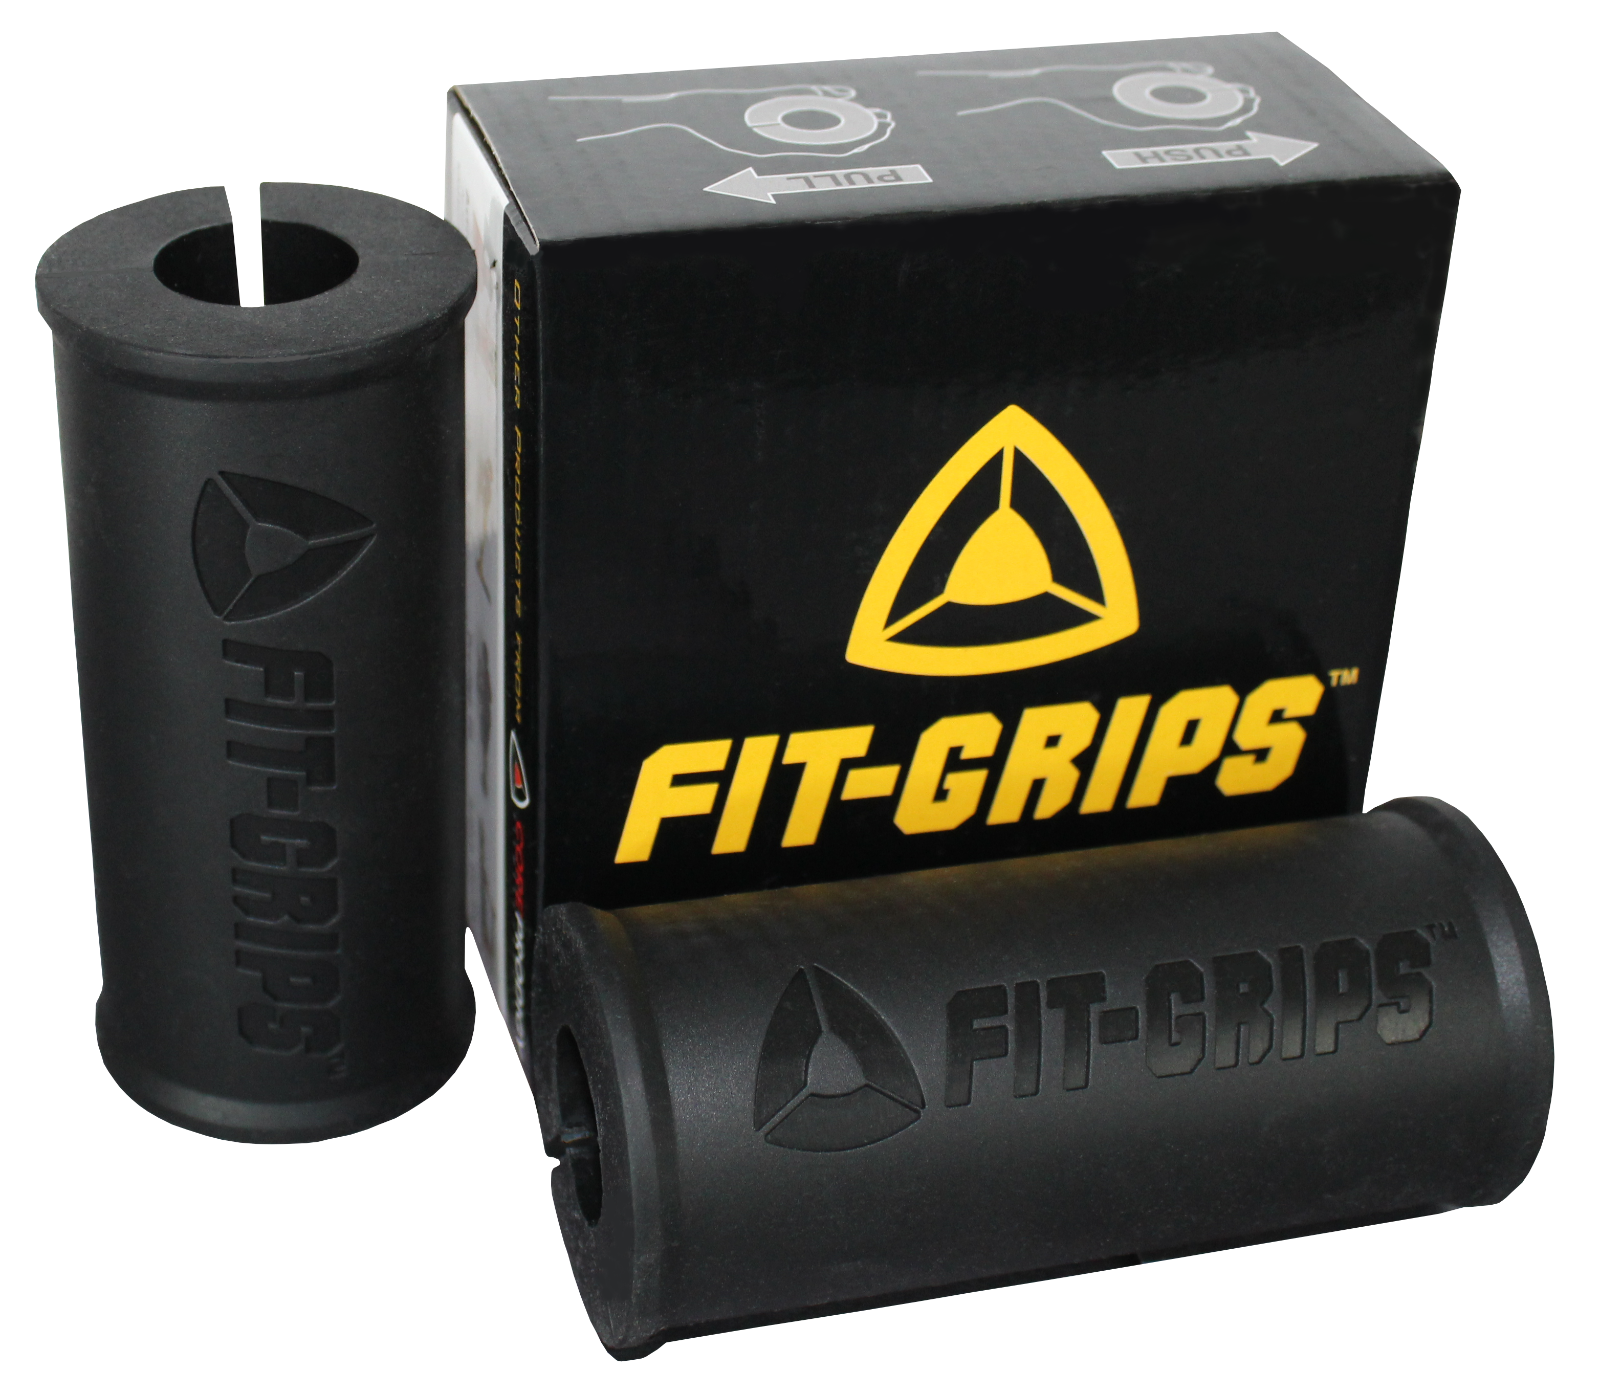 Fit Grips 2.0 - Thick Grips Fat Bar Training - Bicep And Tricep (black)